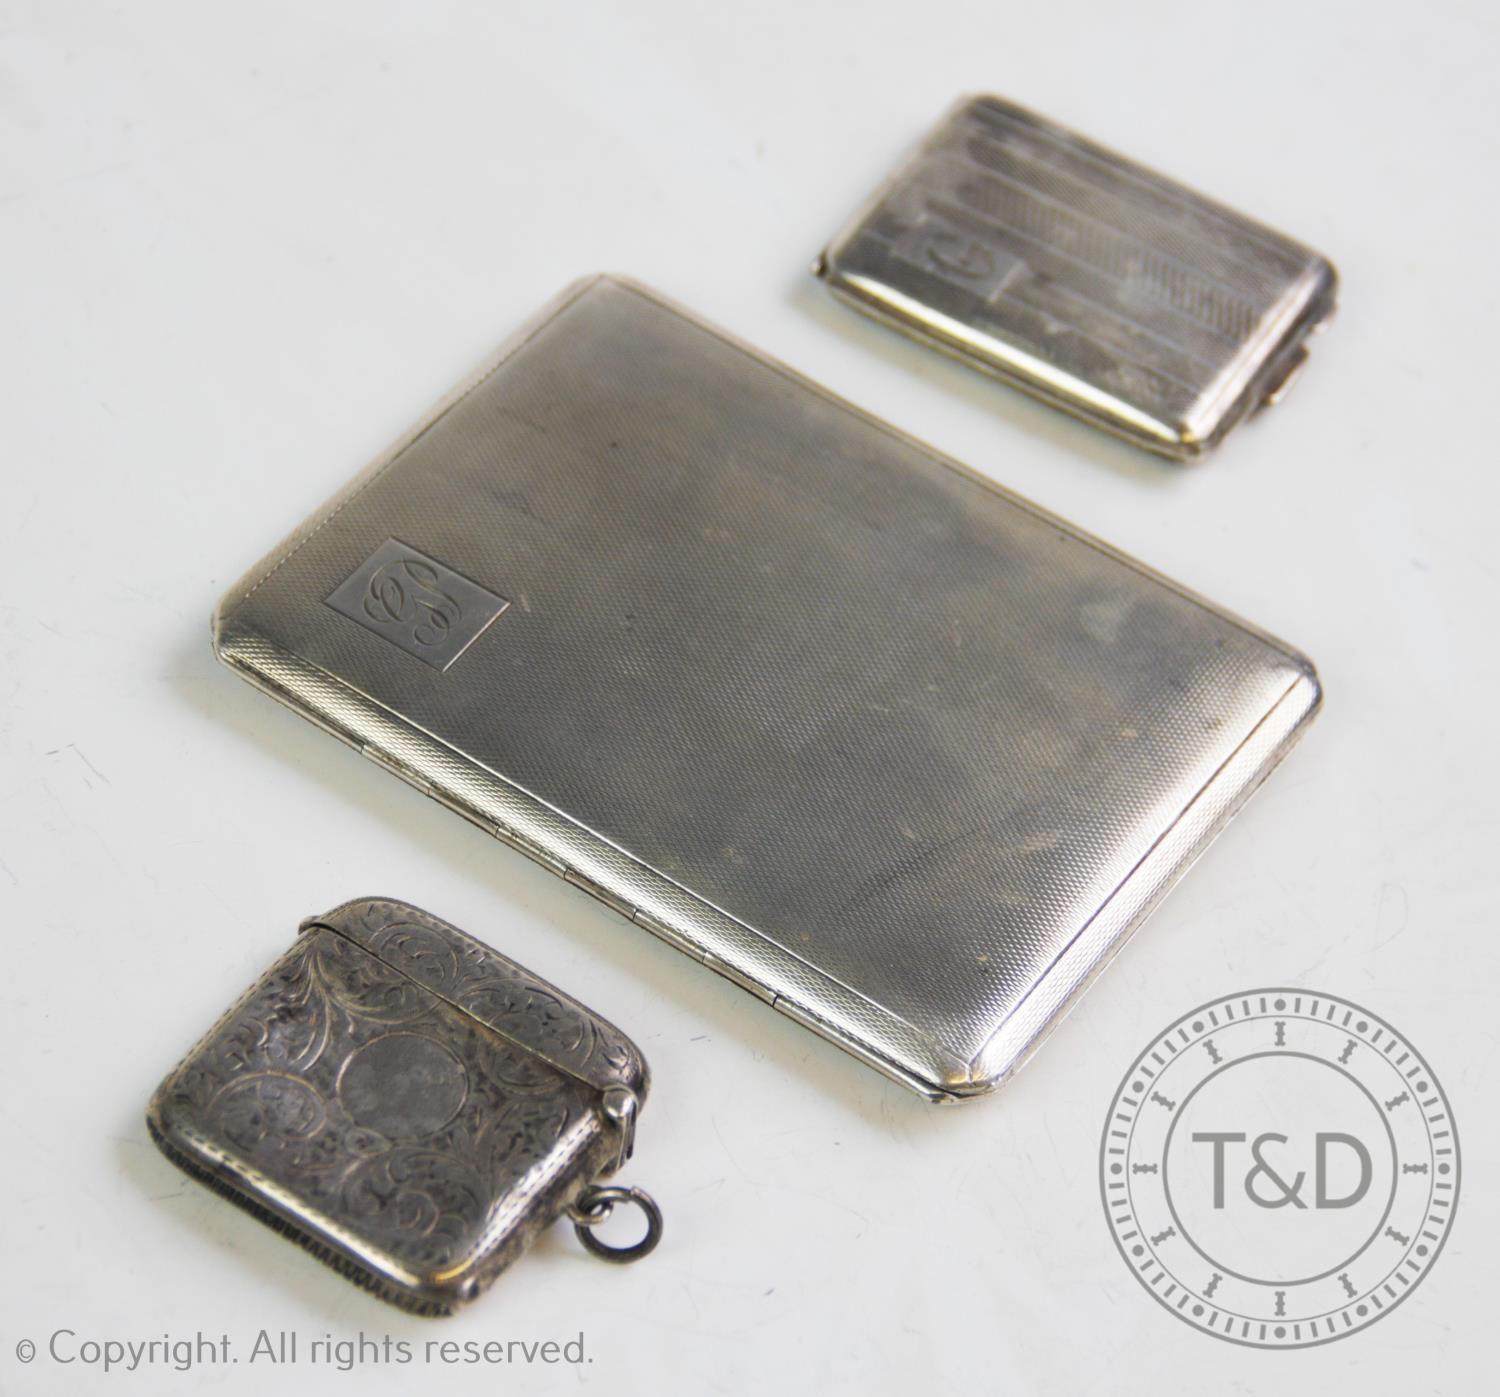 A 20th century silver cigarette case, W T Toghill & Co, Birmingham 1944, with engine turned